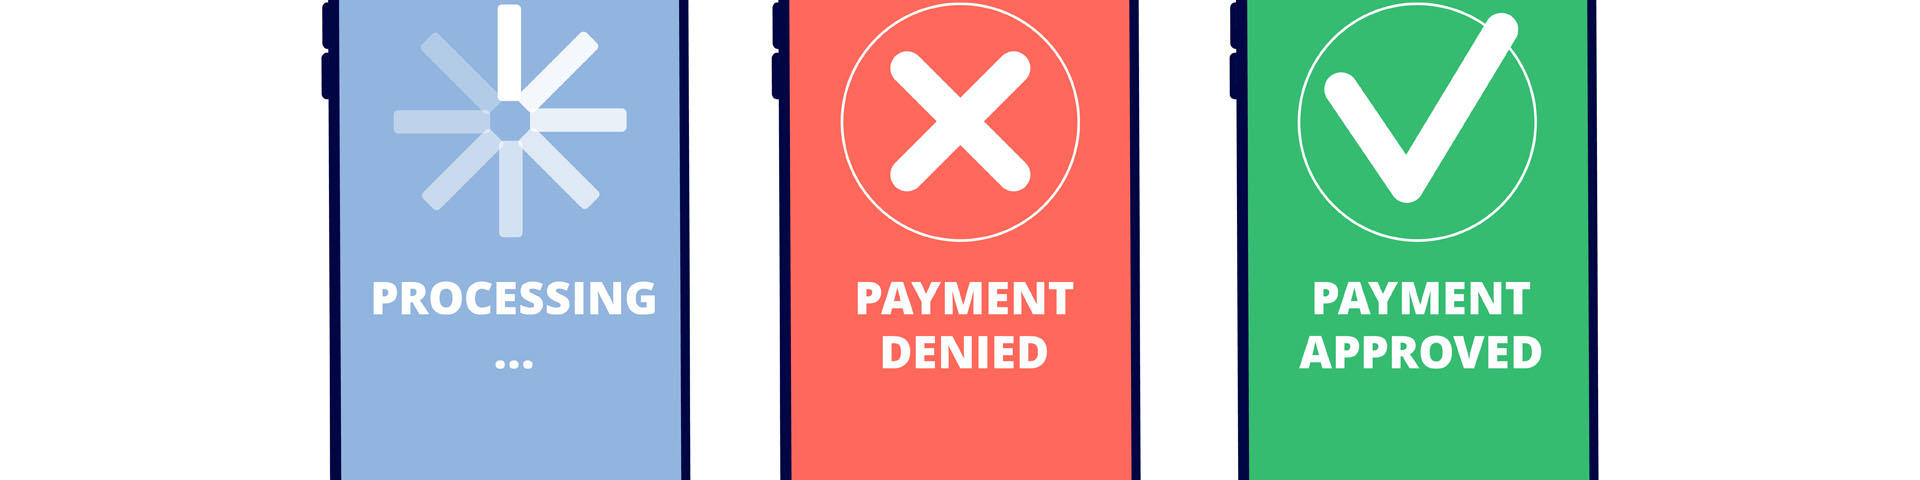 Online payment approved, denied and in process on smartphone screen.